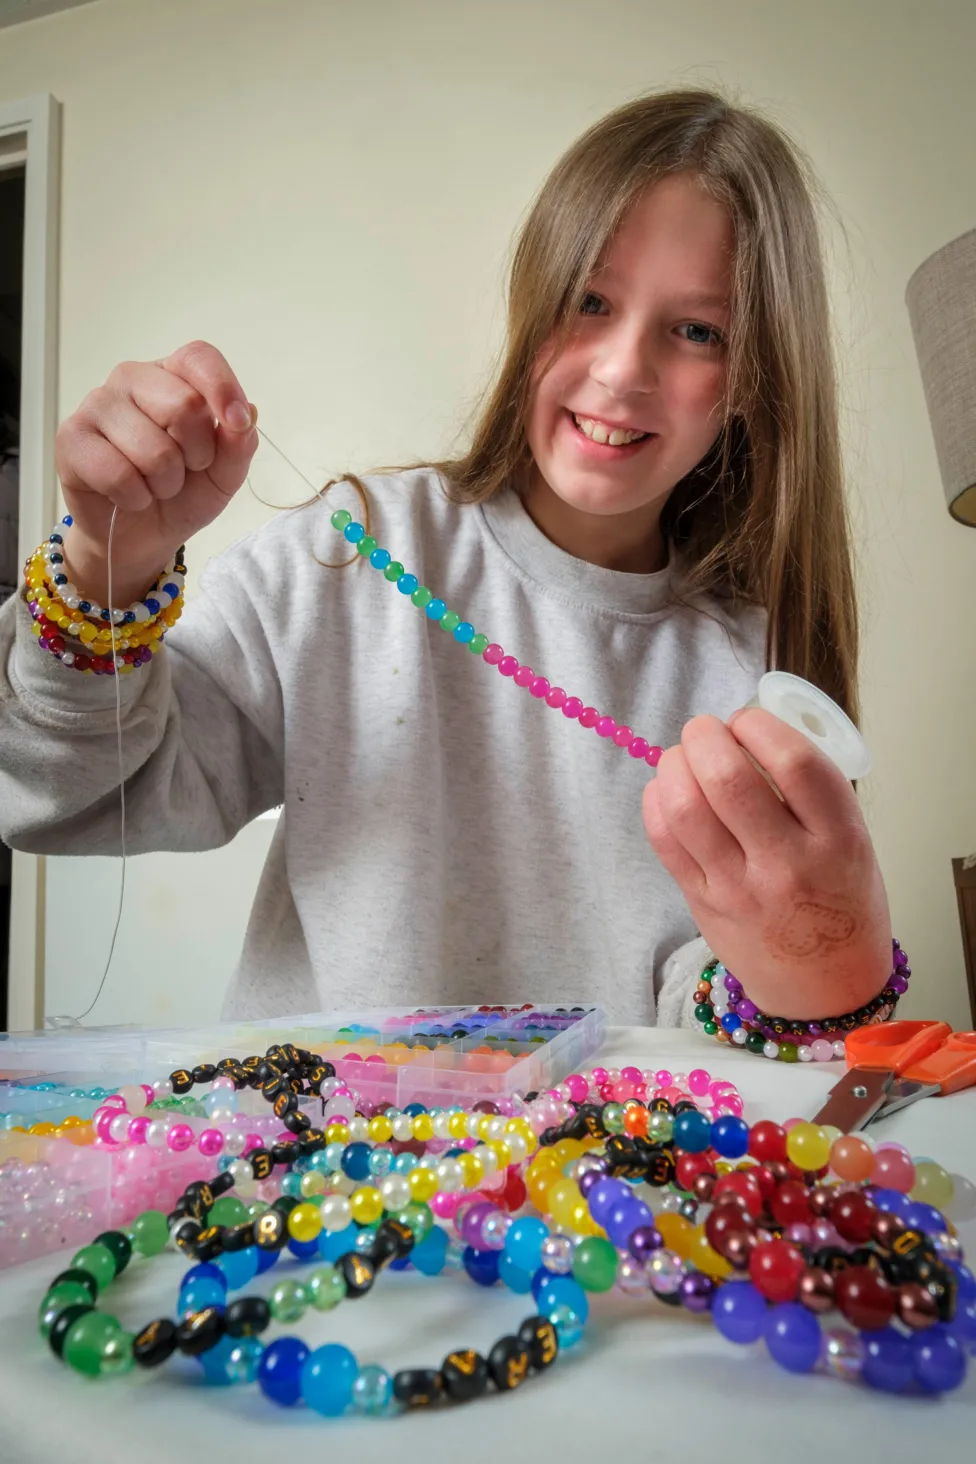 EXCLUSIVE: An 11 years old Taylor Swift fan makes hundreds of friendship bracelets for care home residents: It's an exciting time for Taylor Swift fans as the star kicks off the UK performances of her Eras Tour this week.